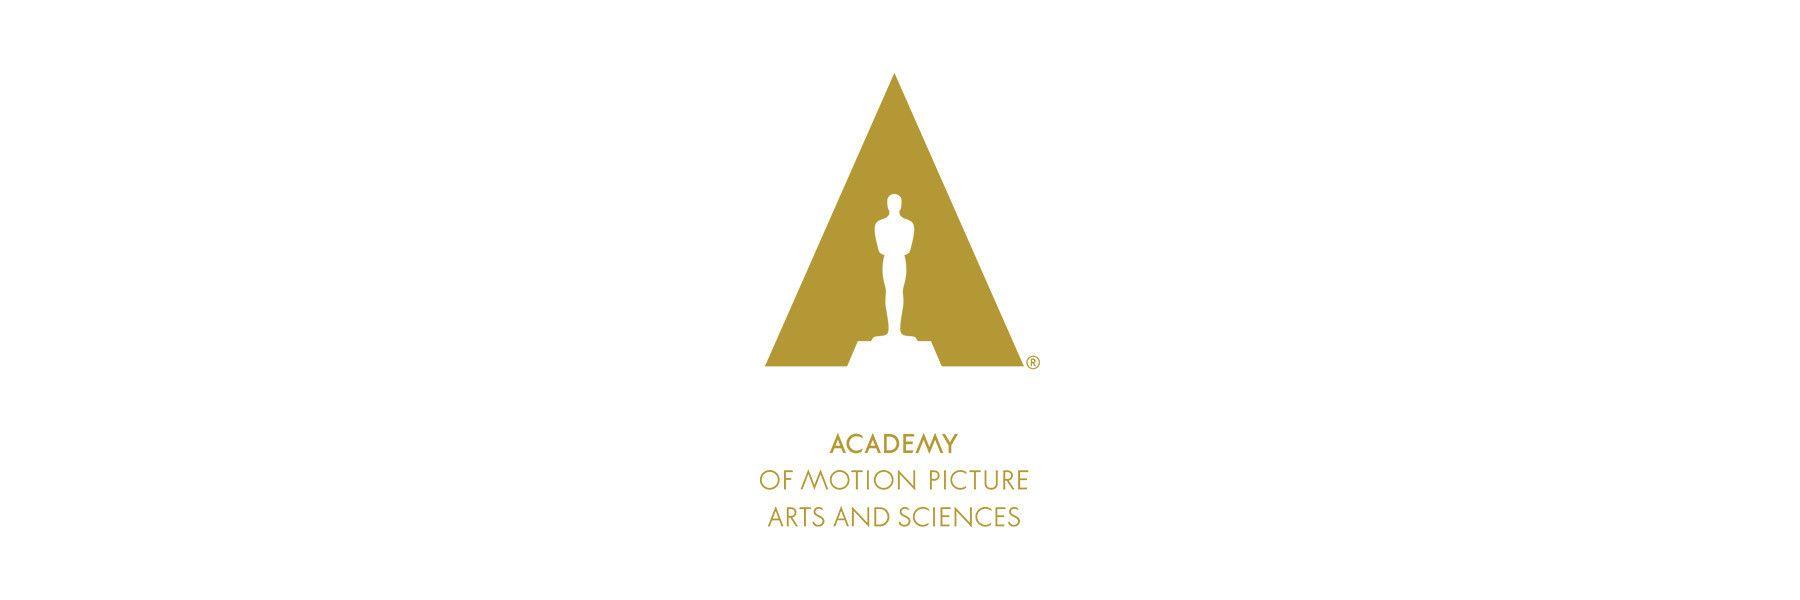 Chicken Triangle Logo - The Academy of Motion Picture Arts and Sciences Supports Chicken ...